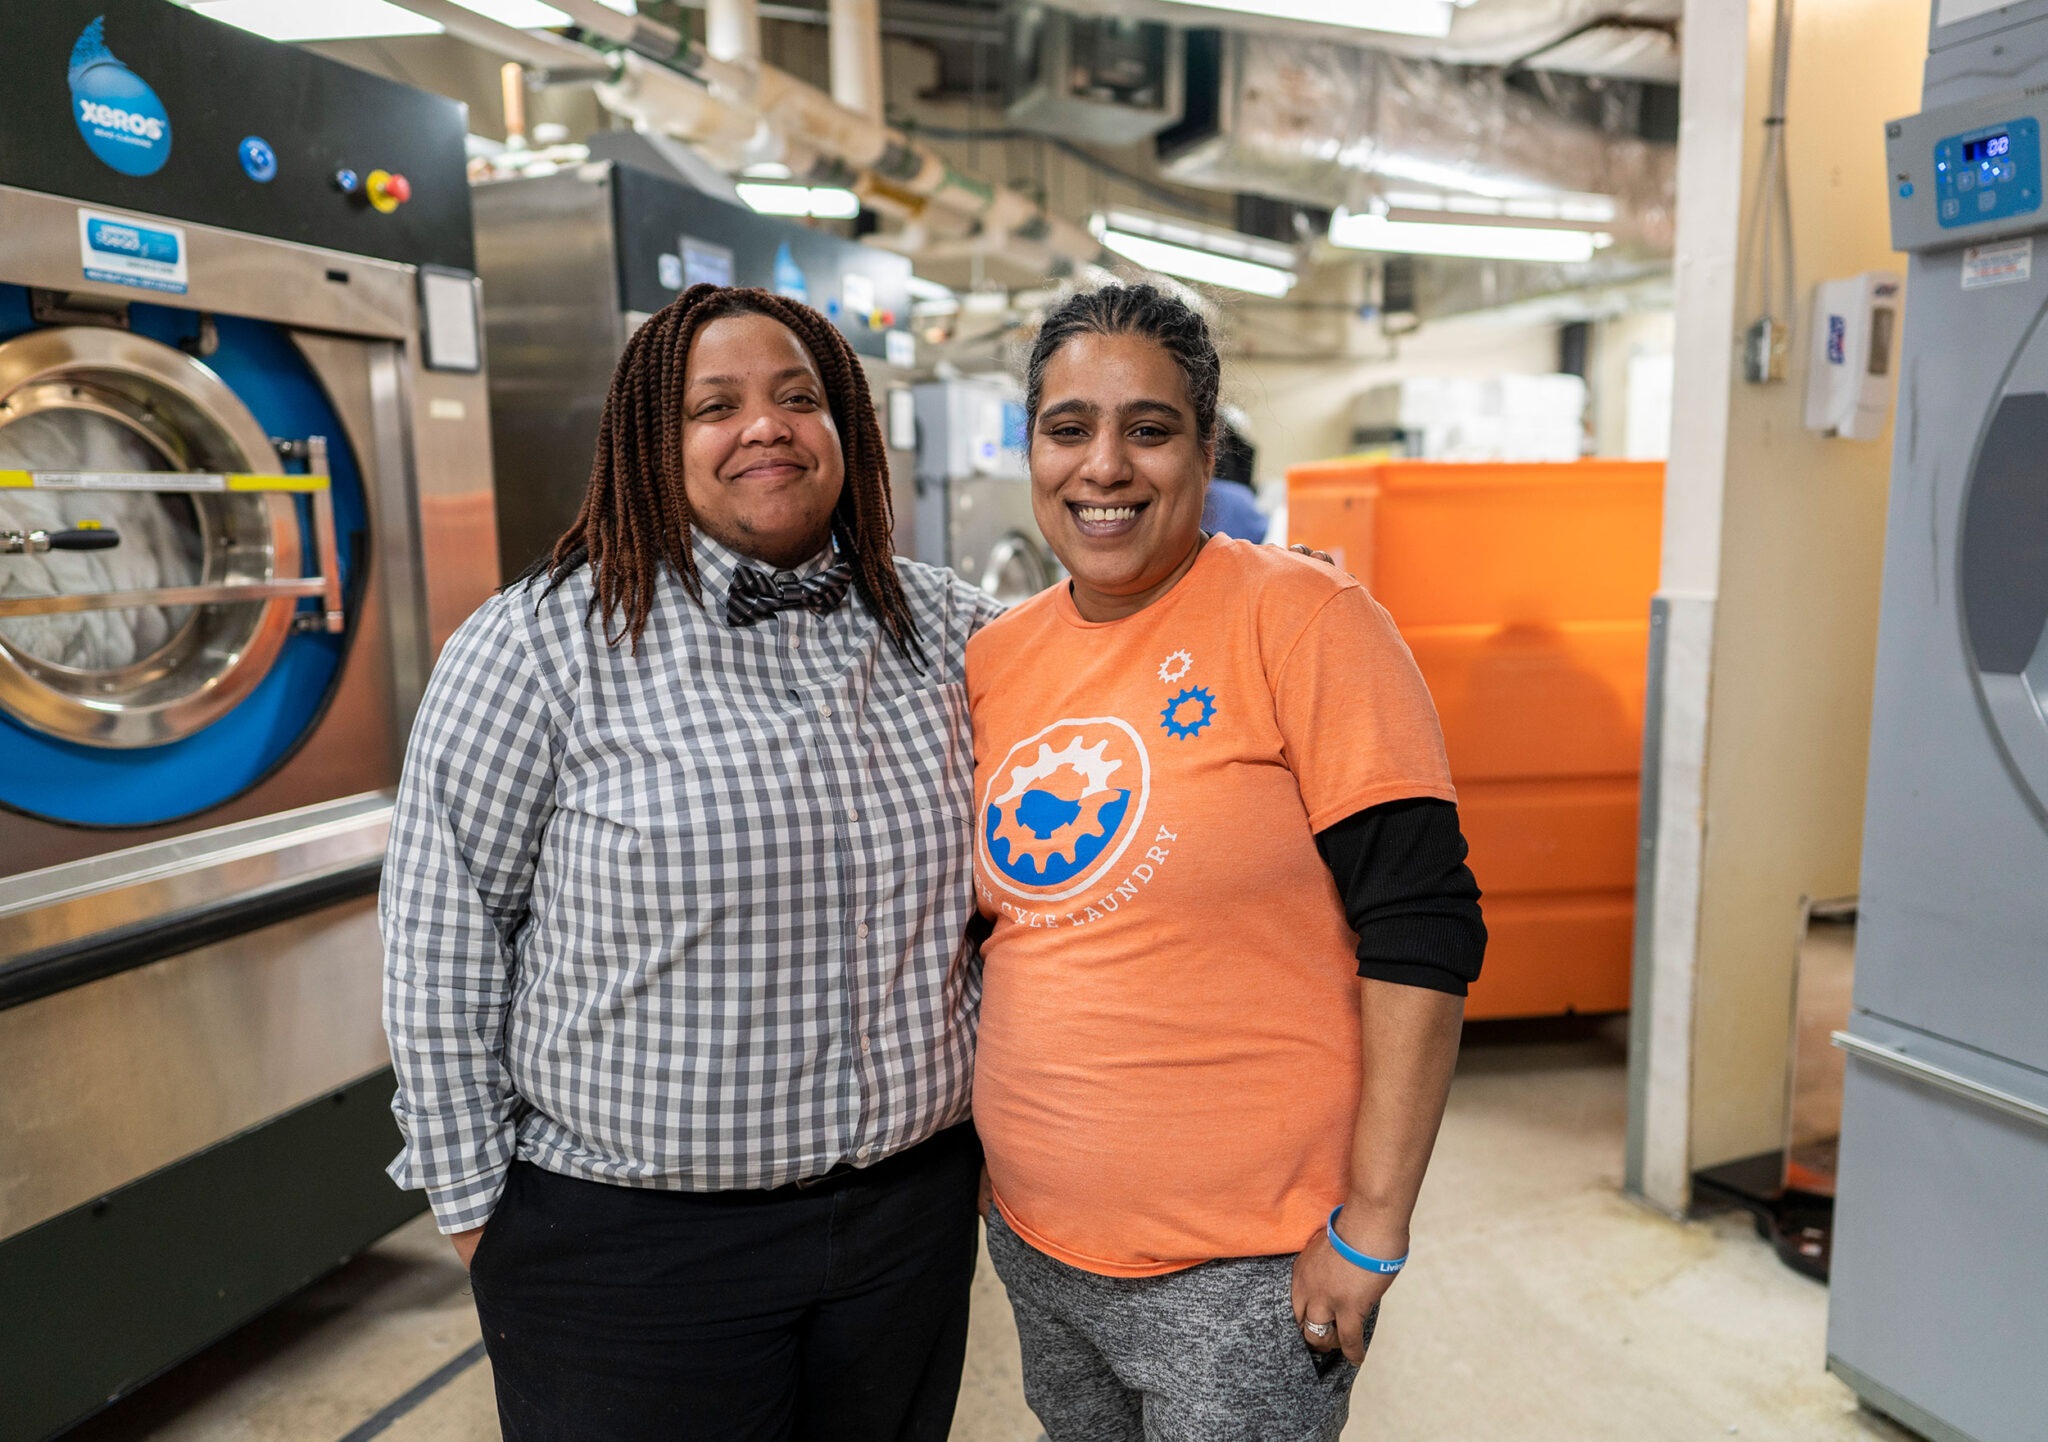 Postindustrial, General Manager Shanelle Morton, left, and Plant Manager Luz Adams, right, at Wash Cycle Laundry in Philadelphia. Photo by Jessica Kourkounis